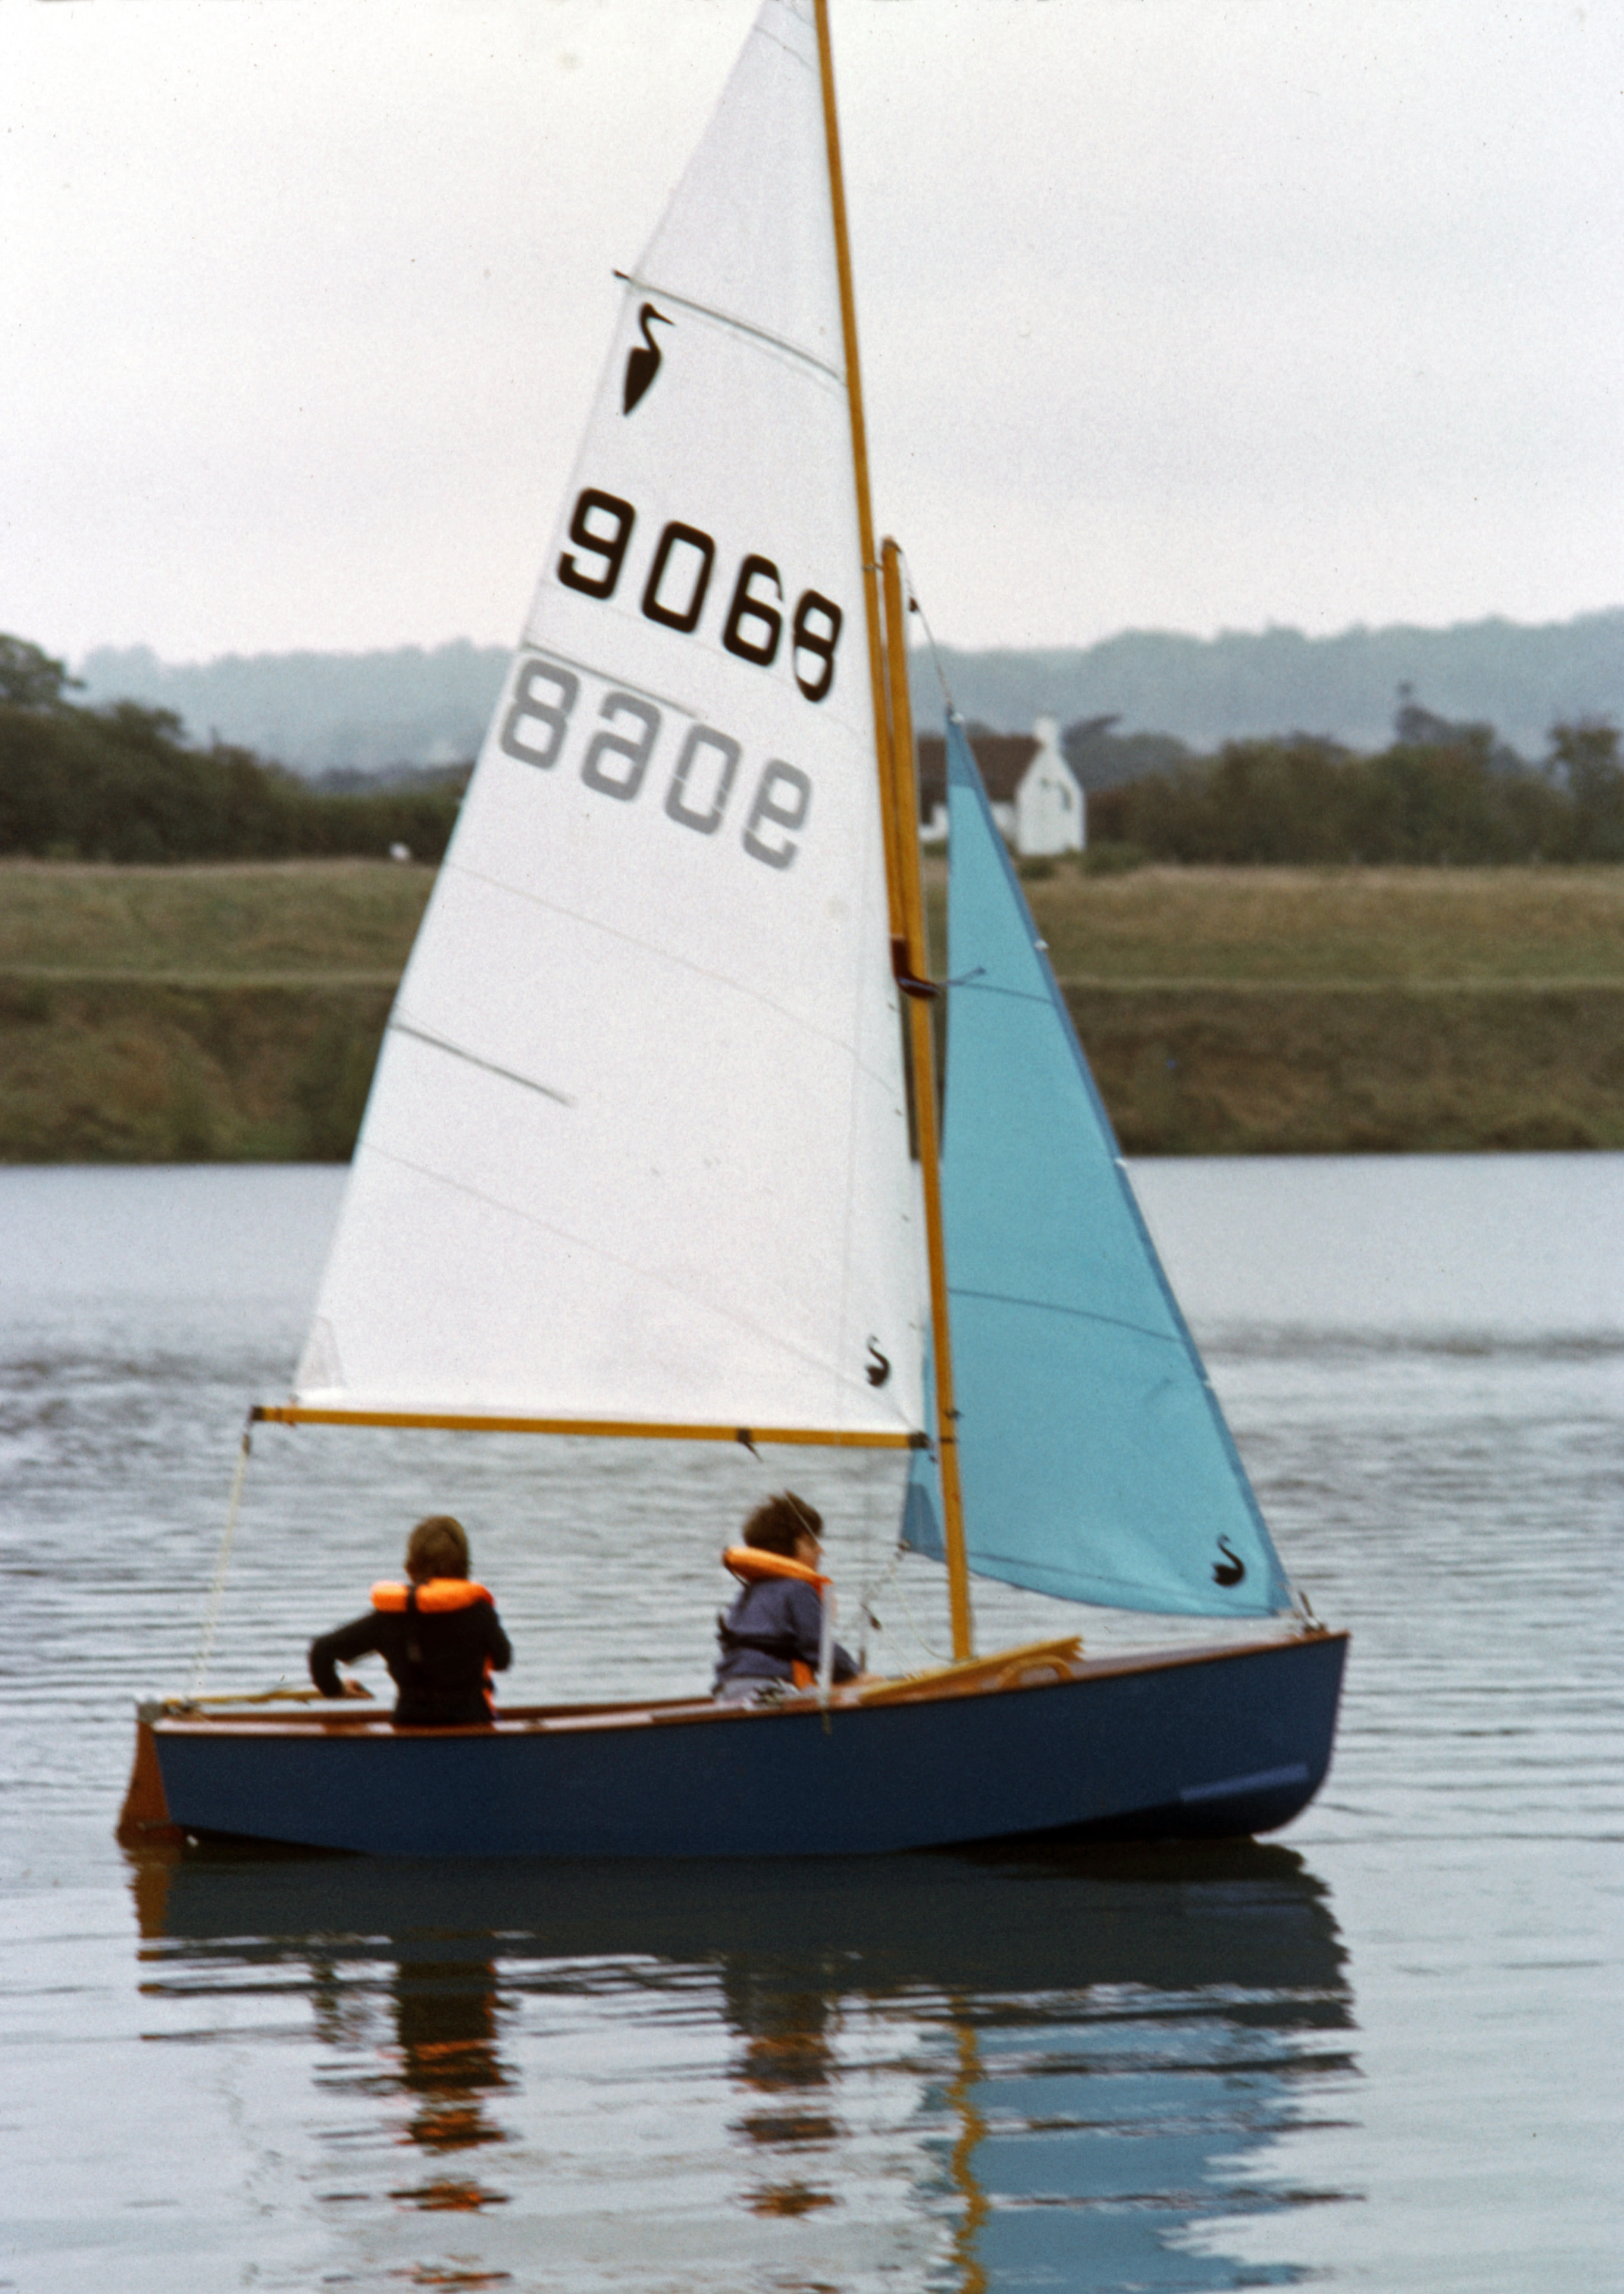 7705931 April 1977 - Jon rounds a mark on his sailing course at Chipstead.